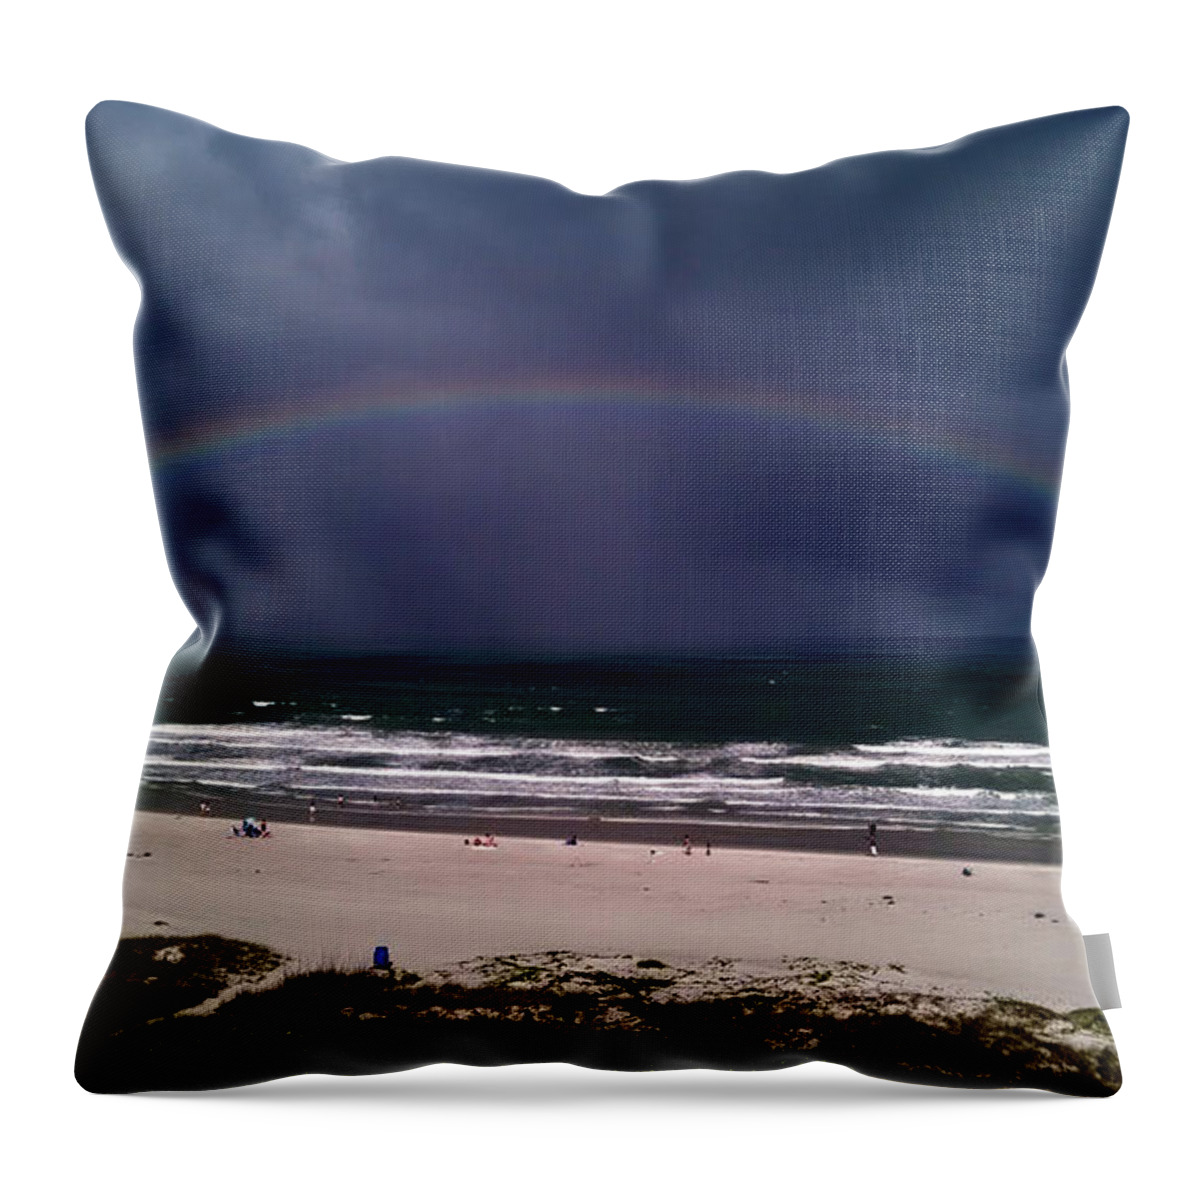 Rainbow Throw Pillow featuring the photograph Rainbow Near The Shore by David Weeks